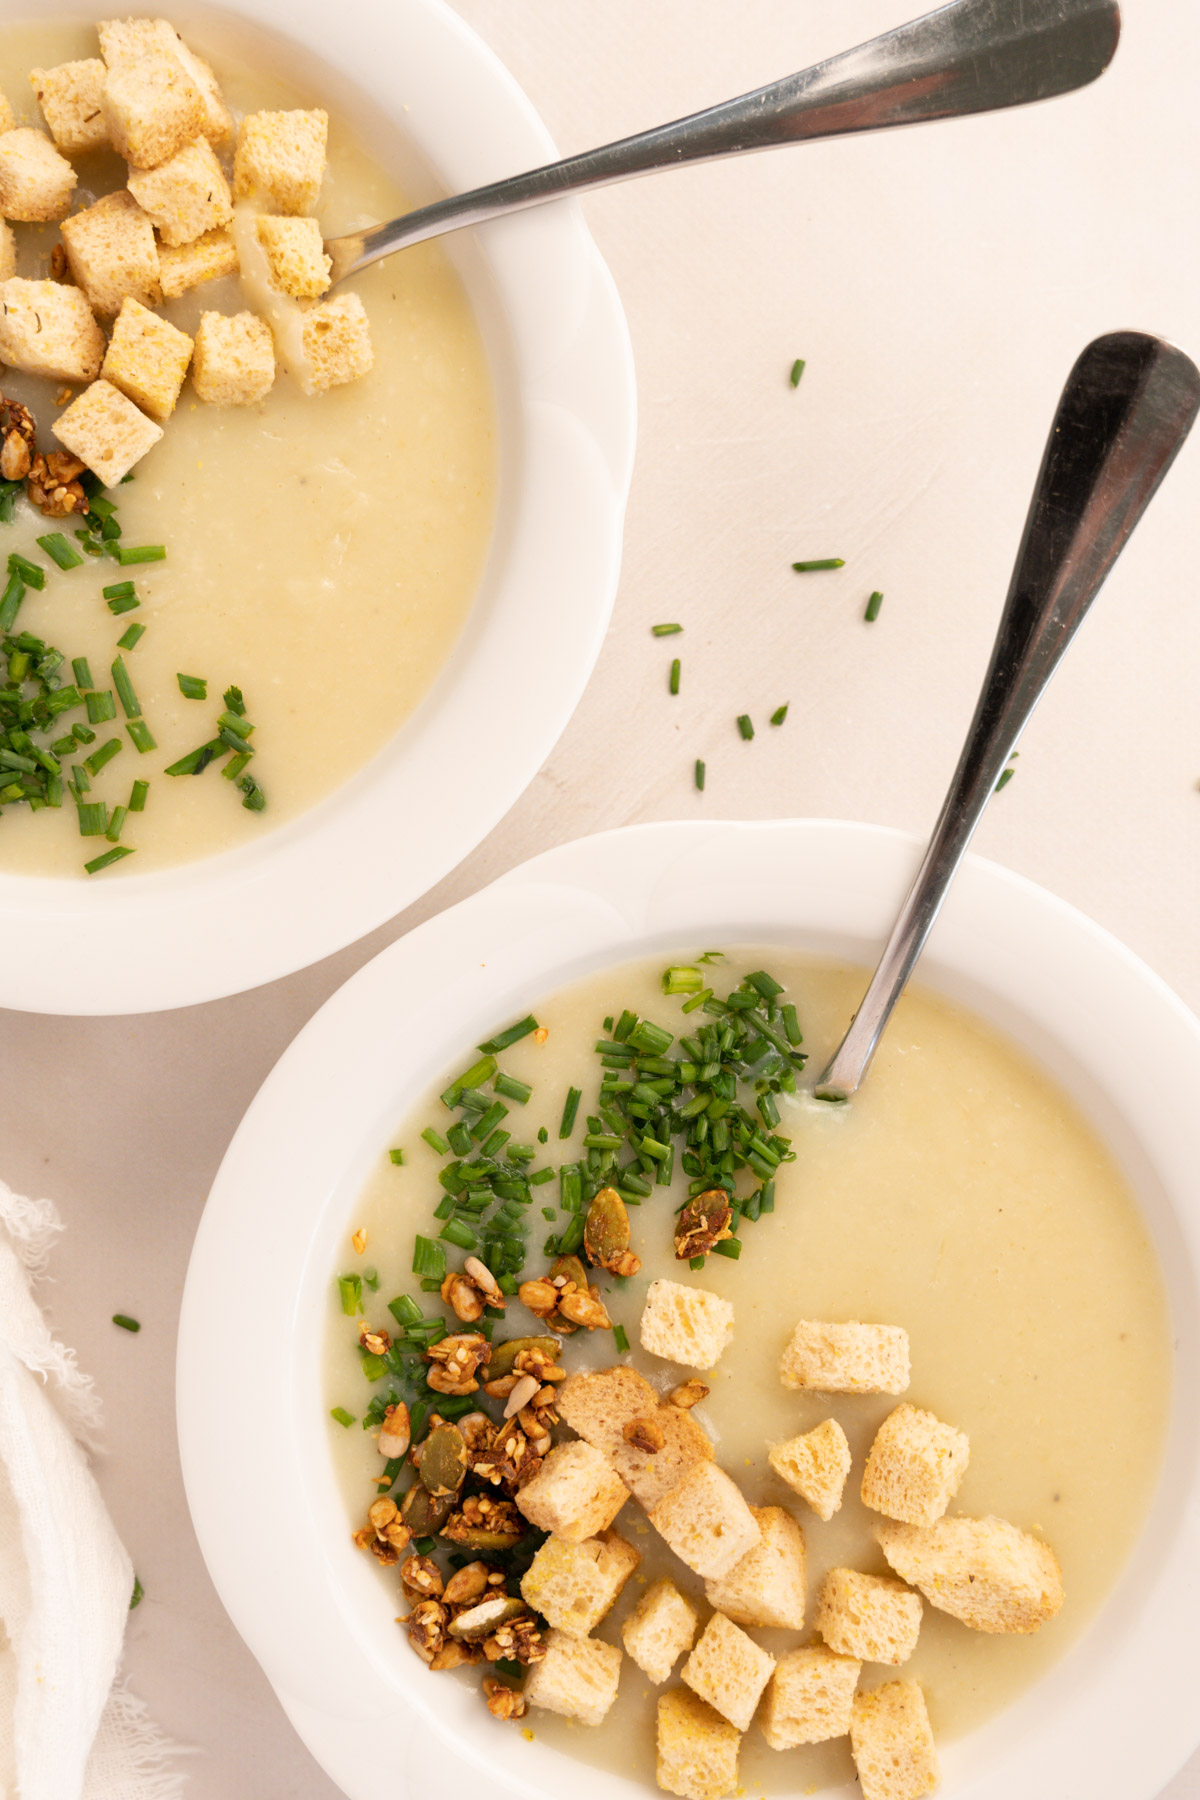 2 bowls of leek and potato soup with croutons, seeds and chives on top